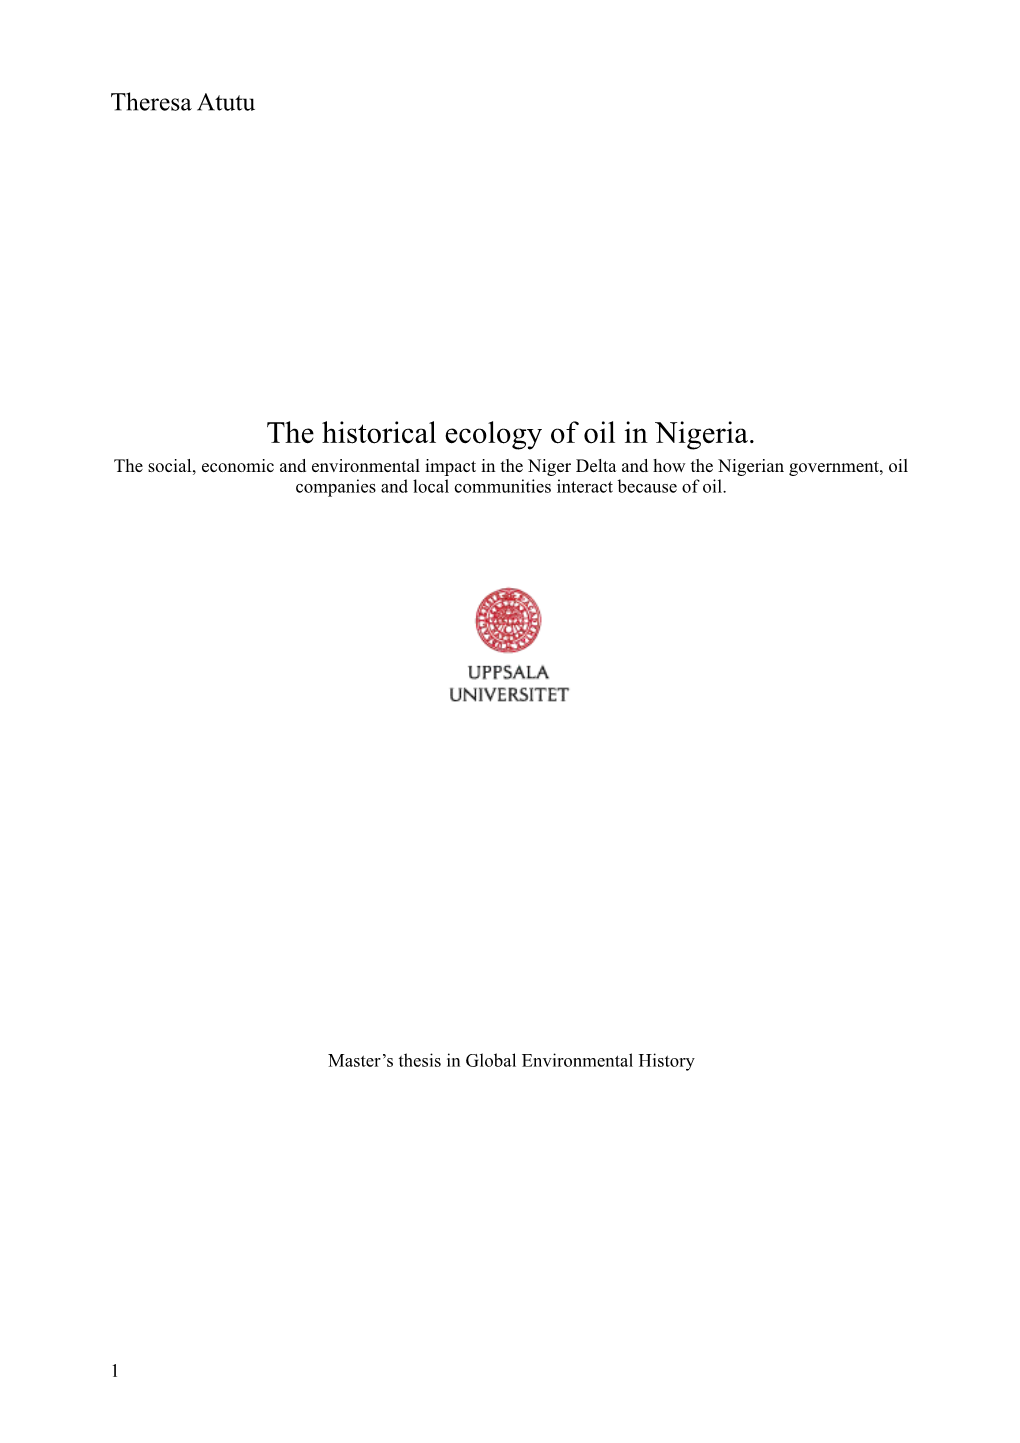 The Historical Ecology of Oil in Nigeria